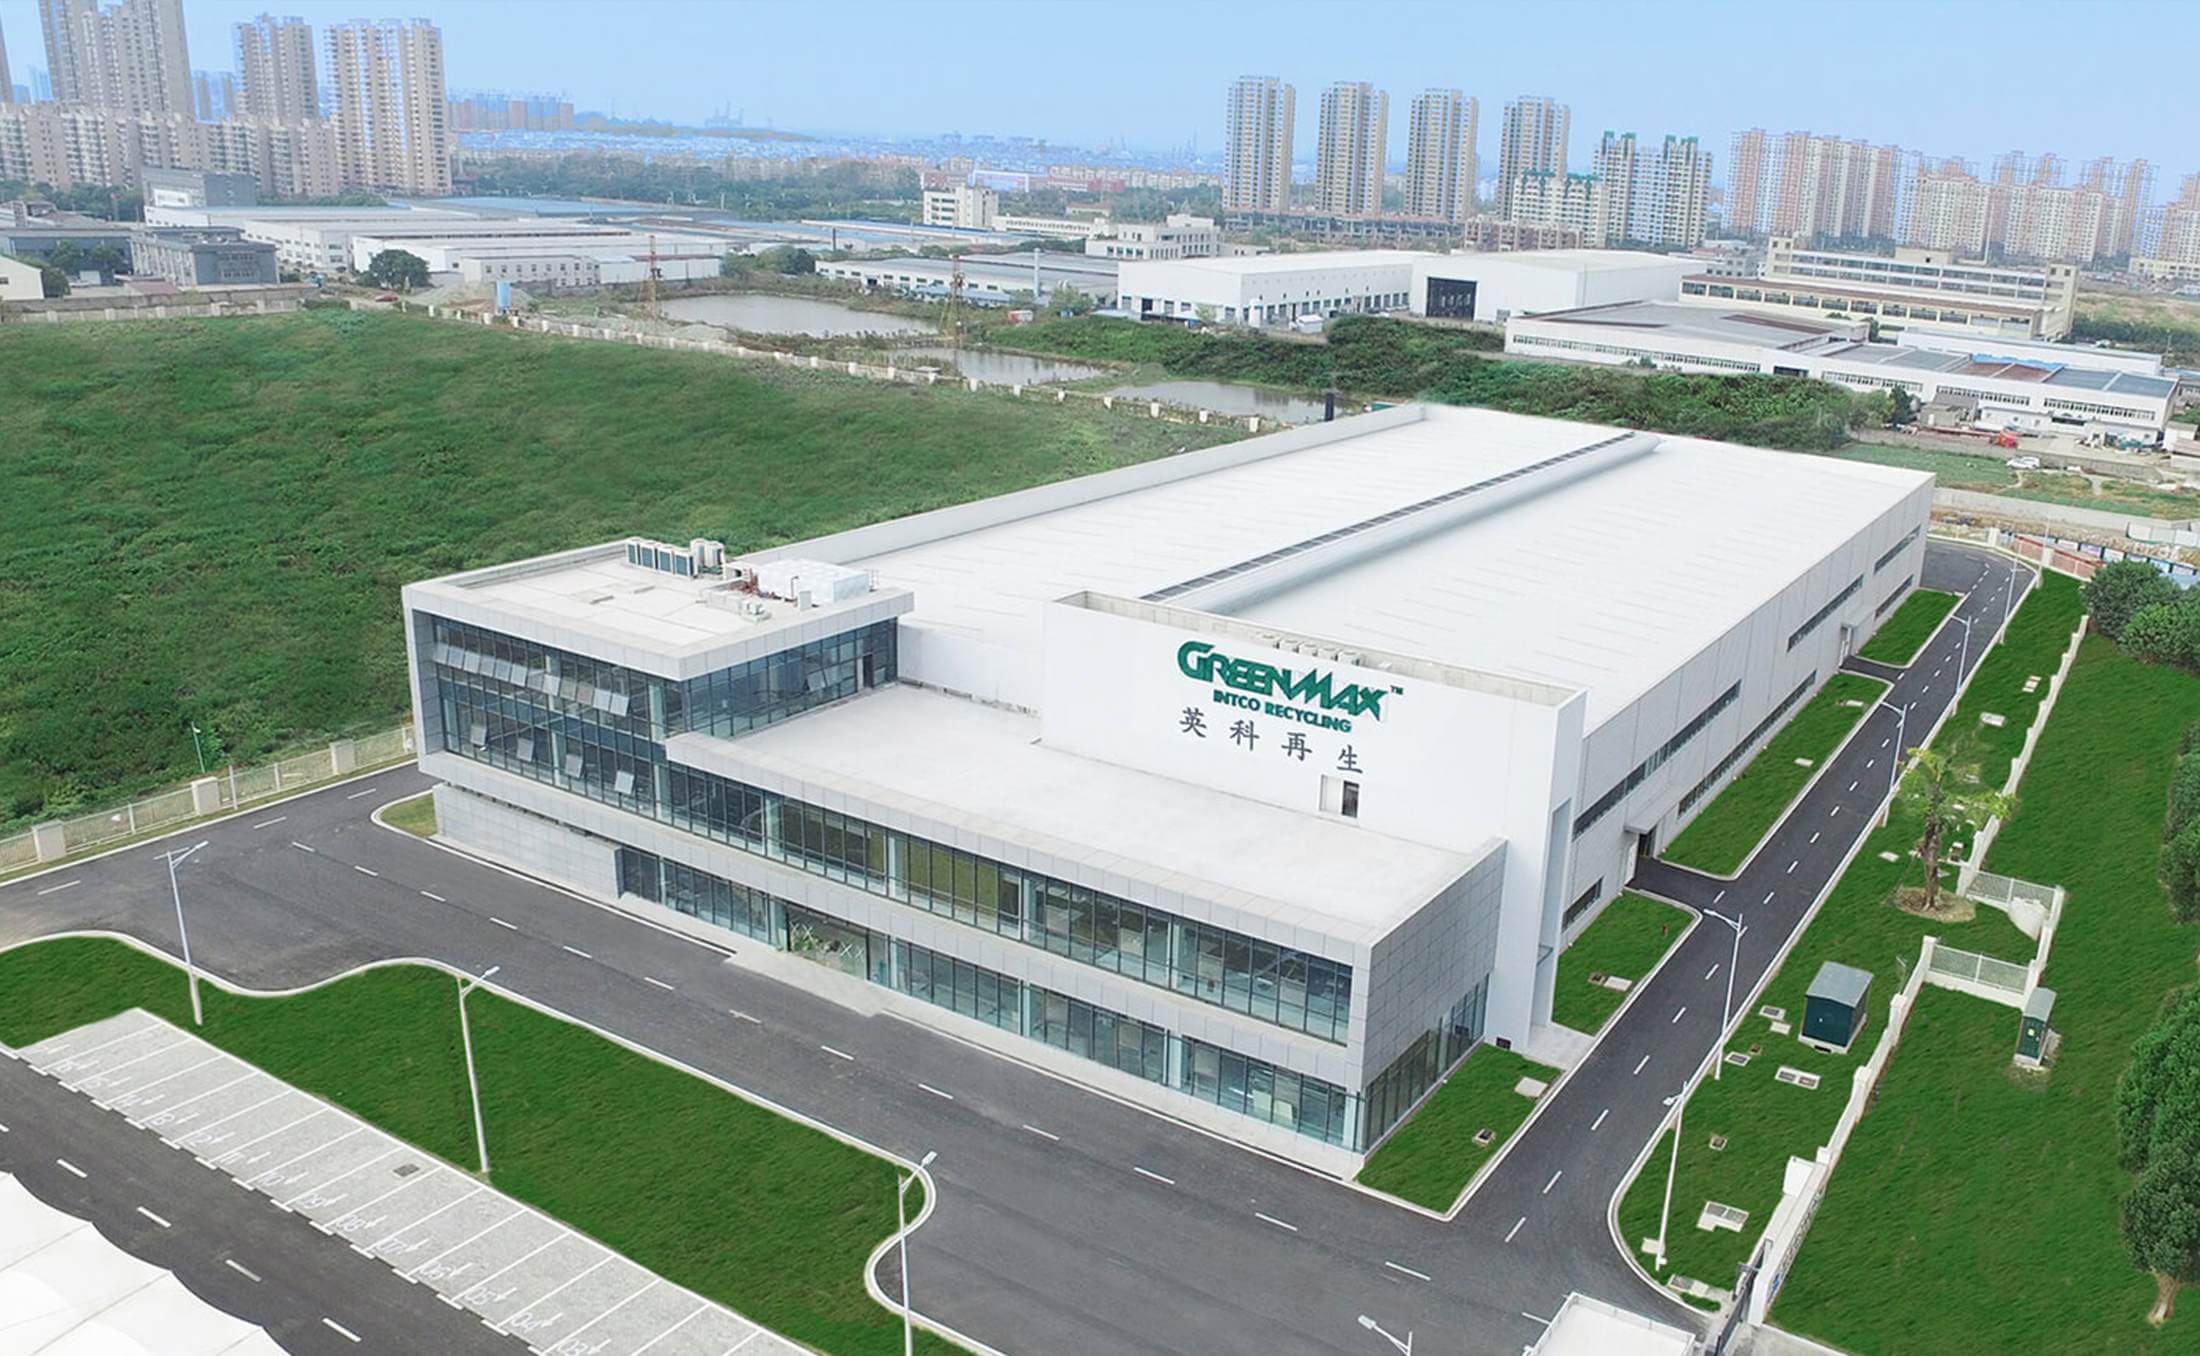 Lu’an Intco, the production base of polystyrene picture frames mouldings.